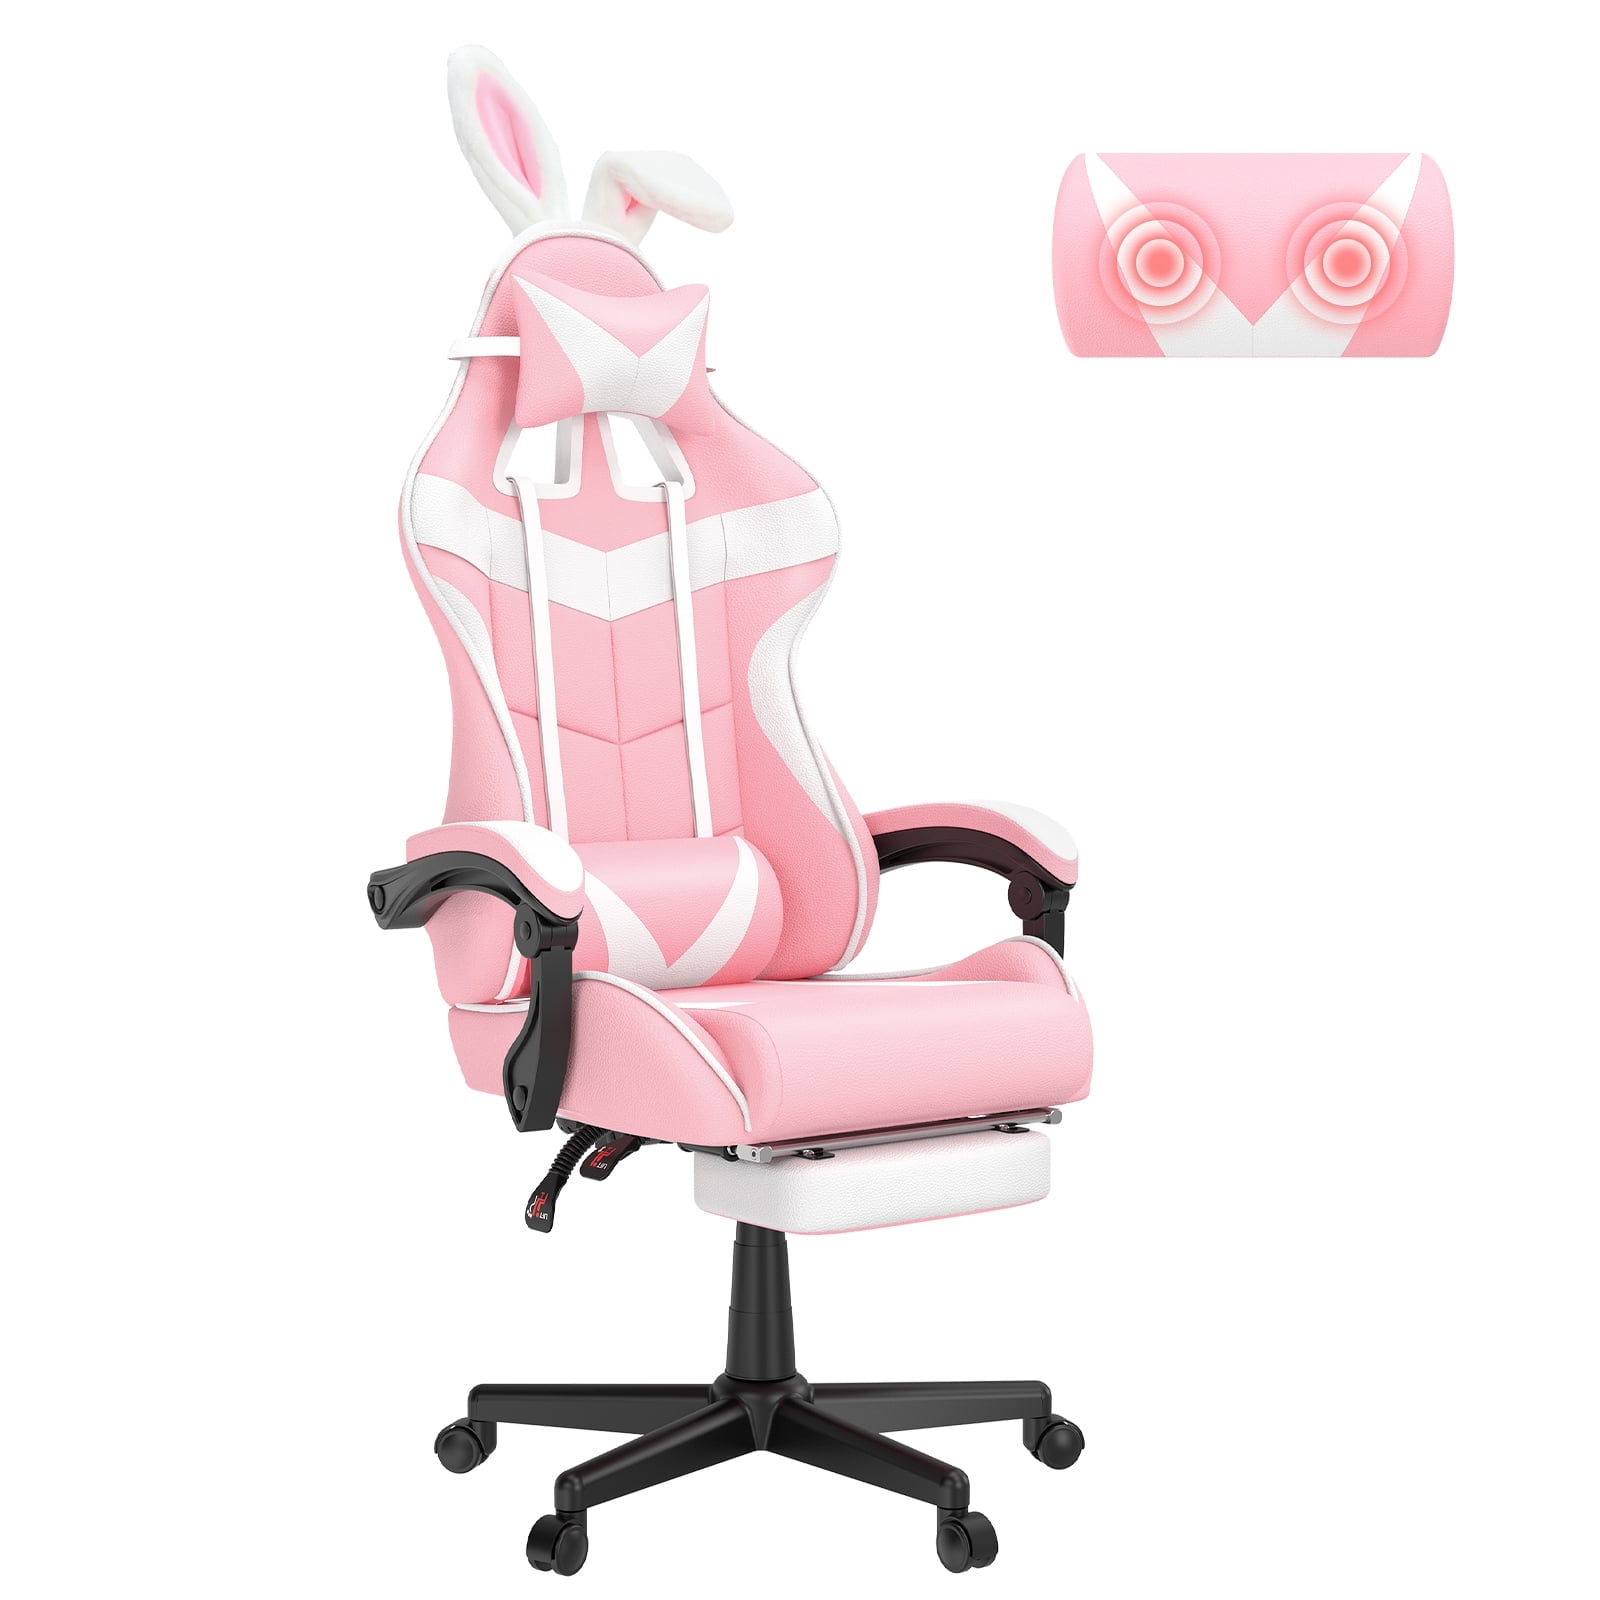 Soontrans Pink Gaming Chair with Footrest, Ergonomic Office Chair with  Lumbar Pillow & Adjustable Headrest Support, Gamers Game Chair, Pink and  White